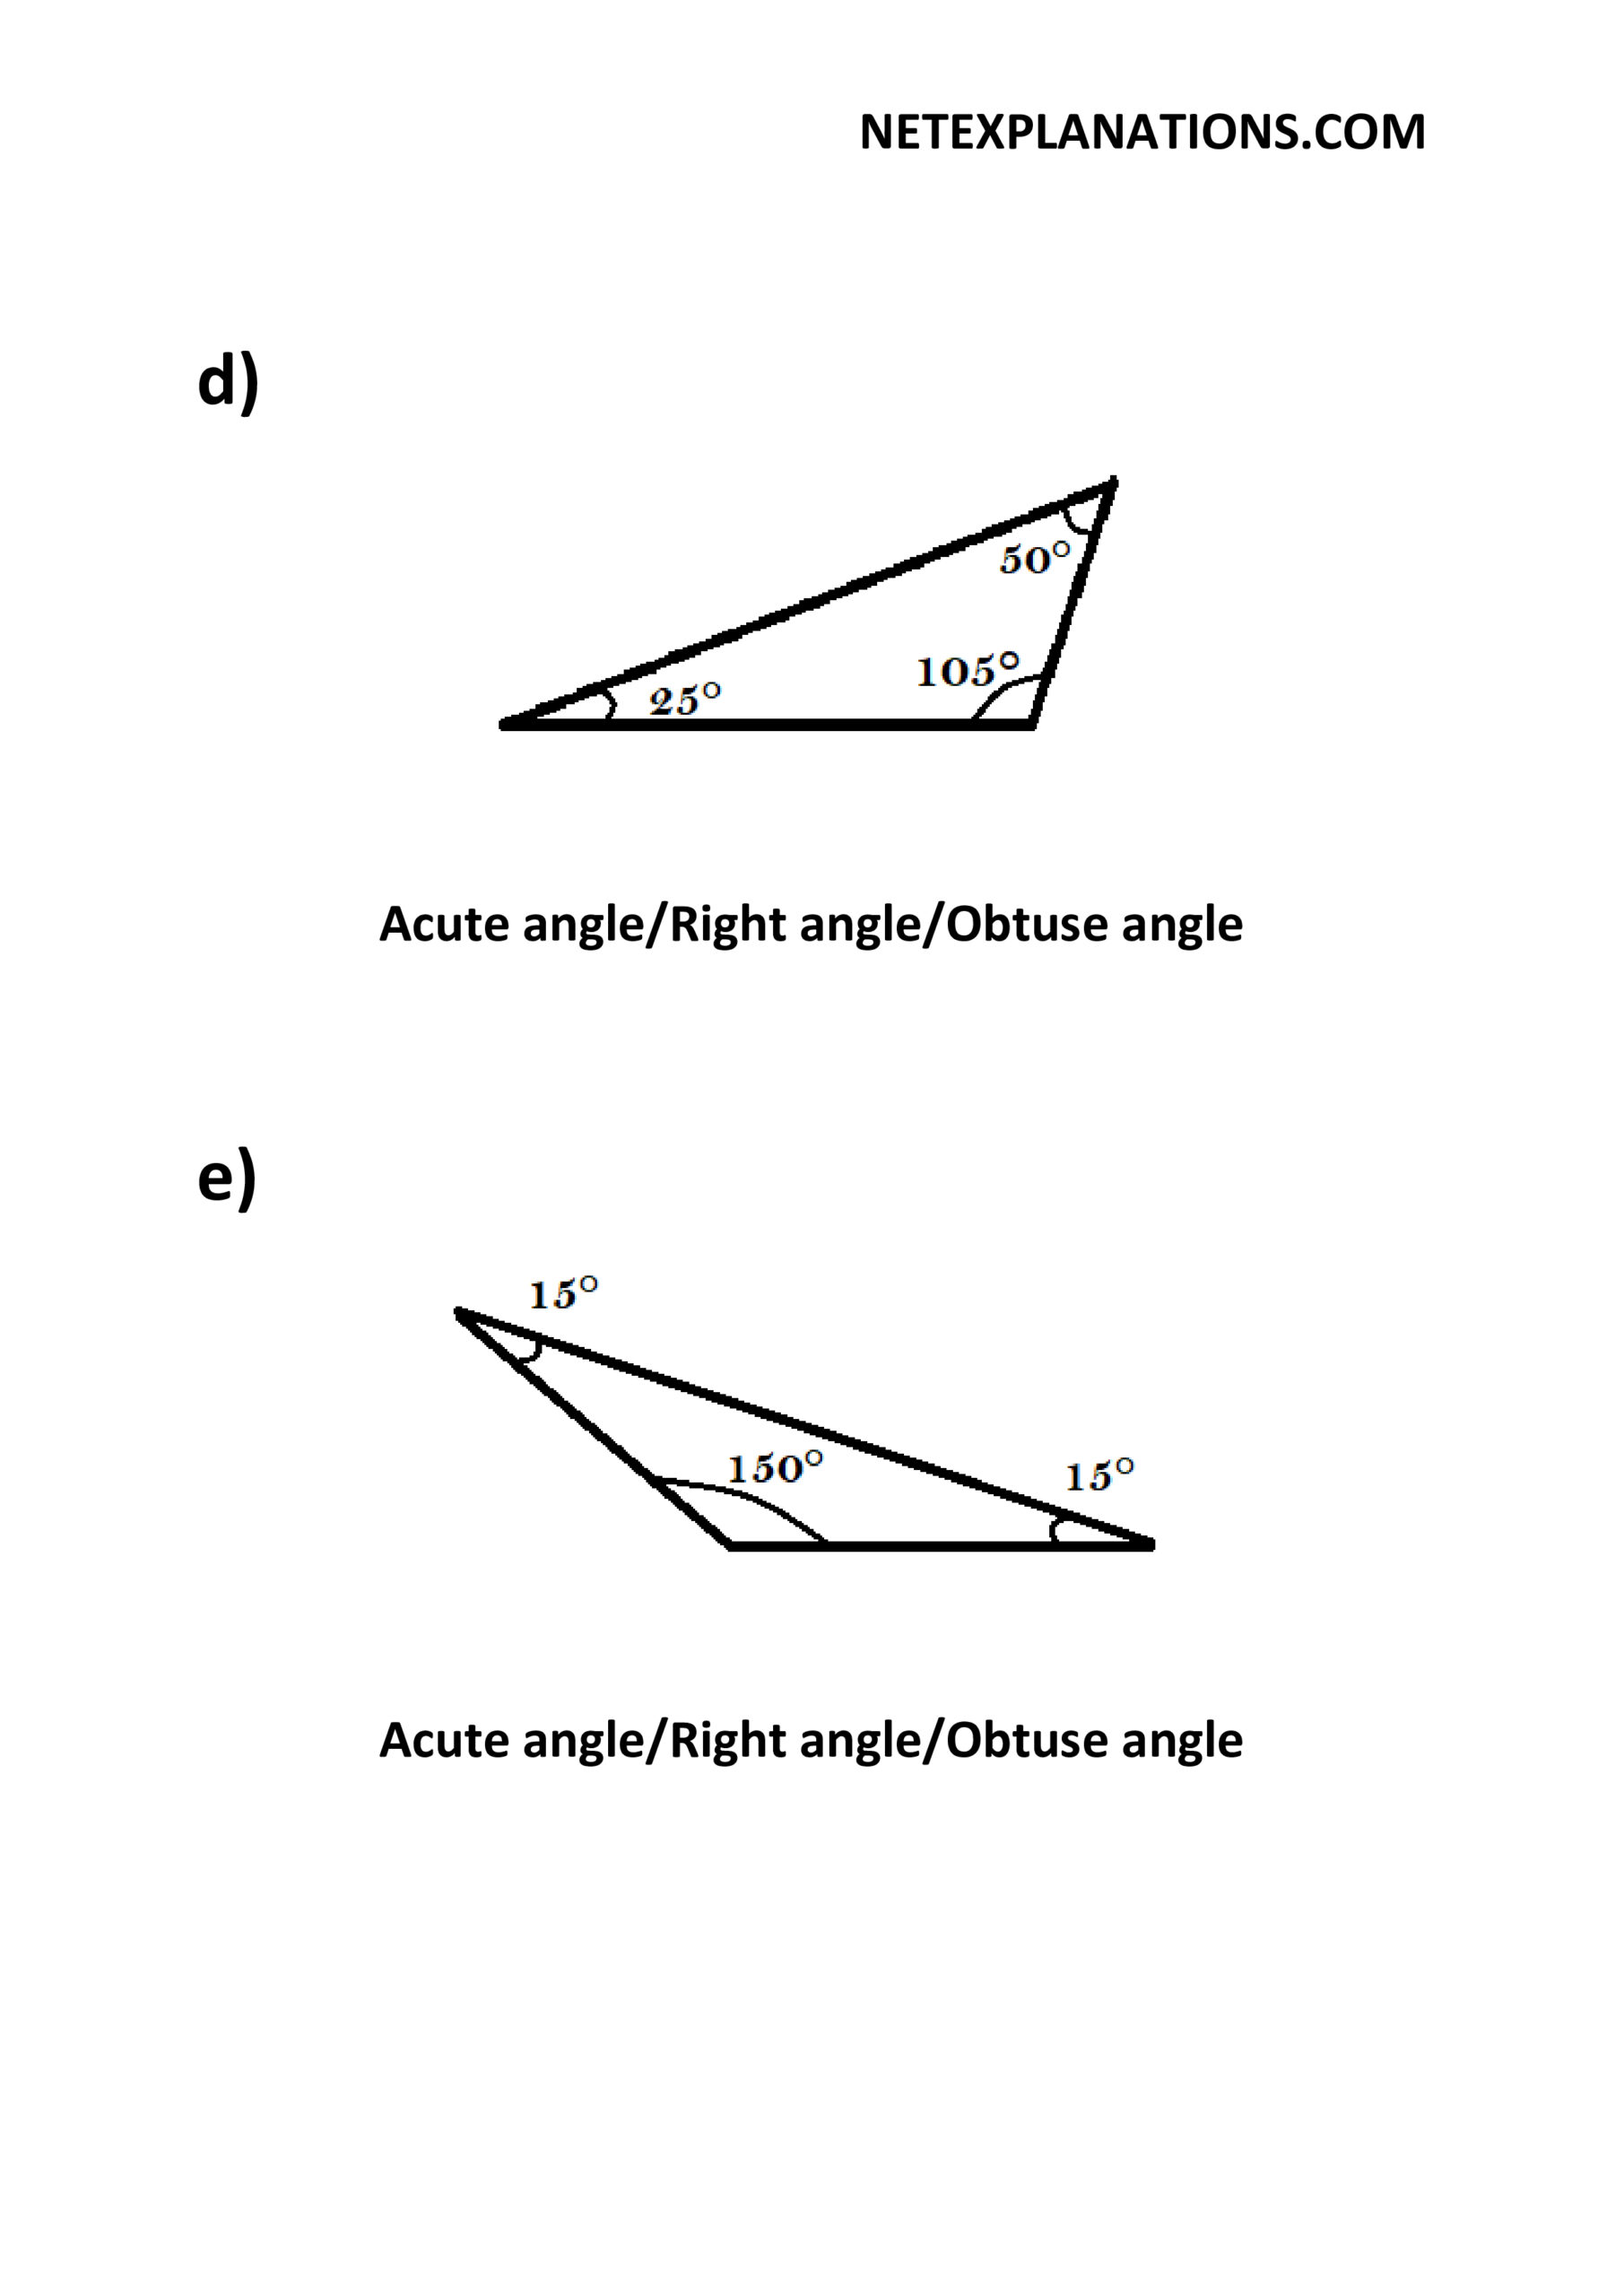 High quality triangle worksheets